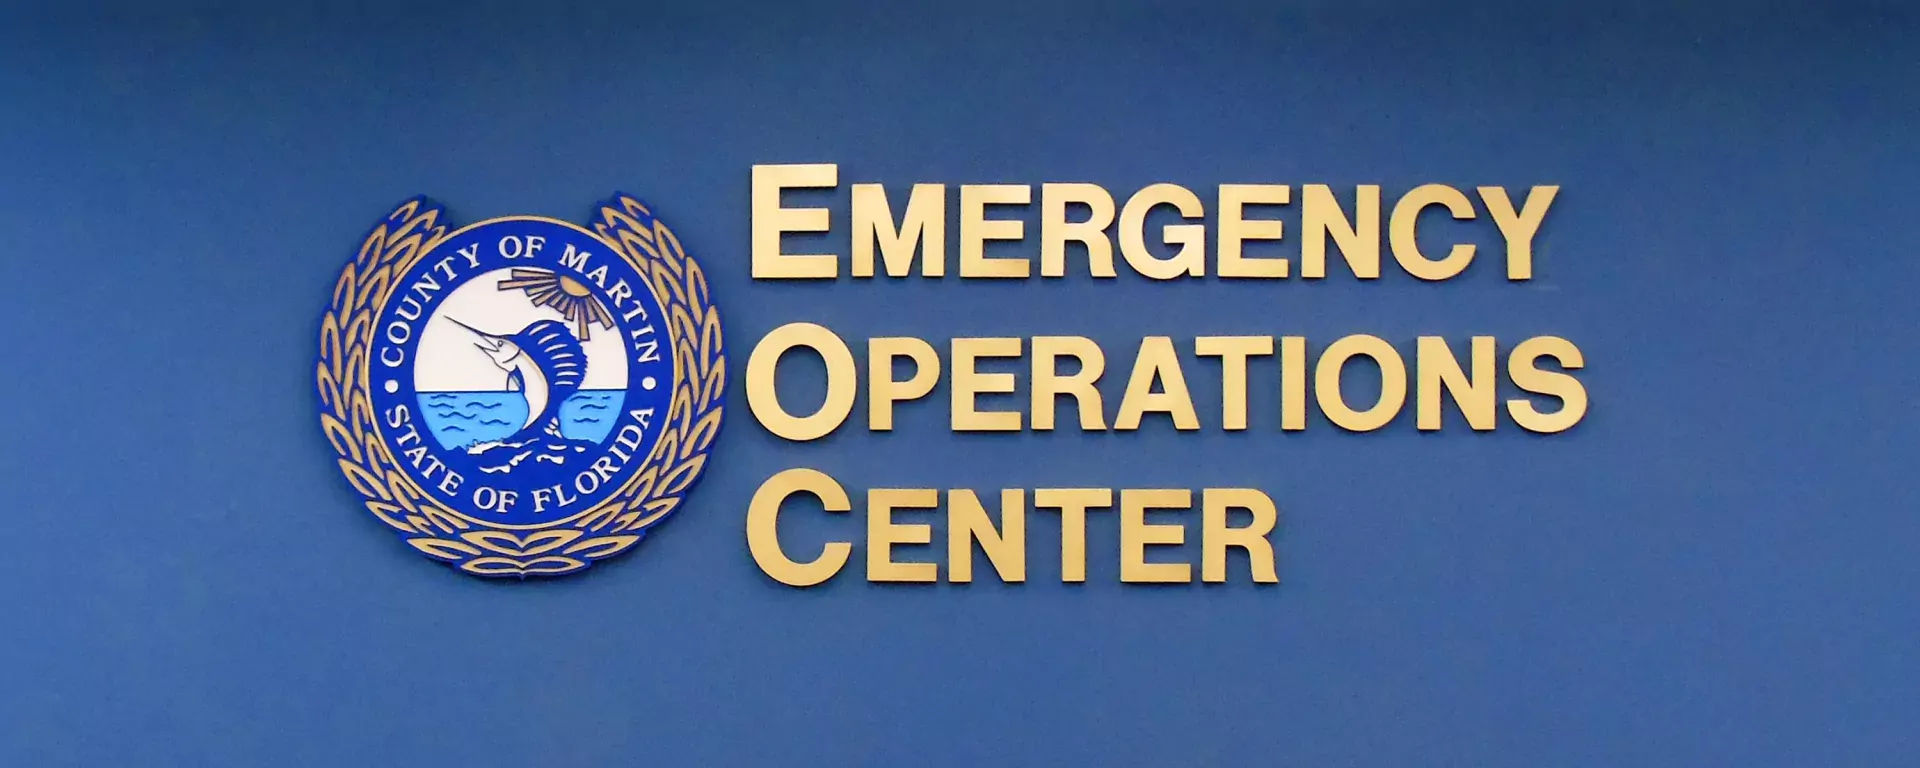 Martin County Emergency Operations Center